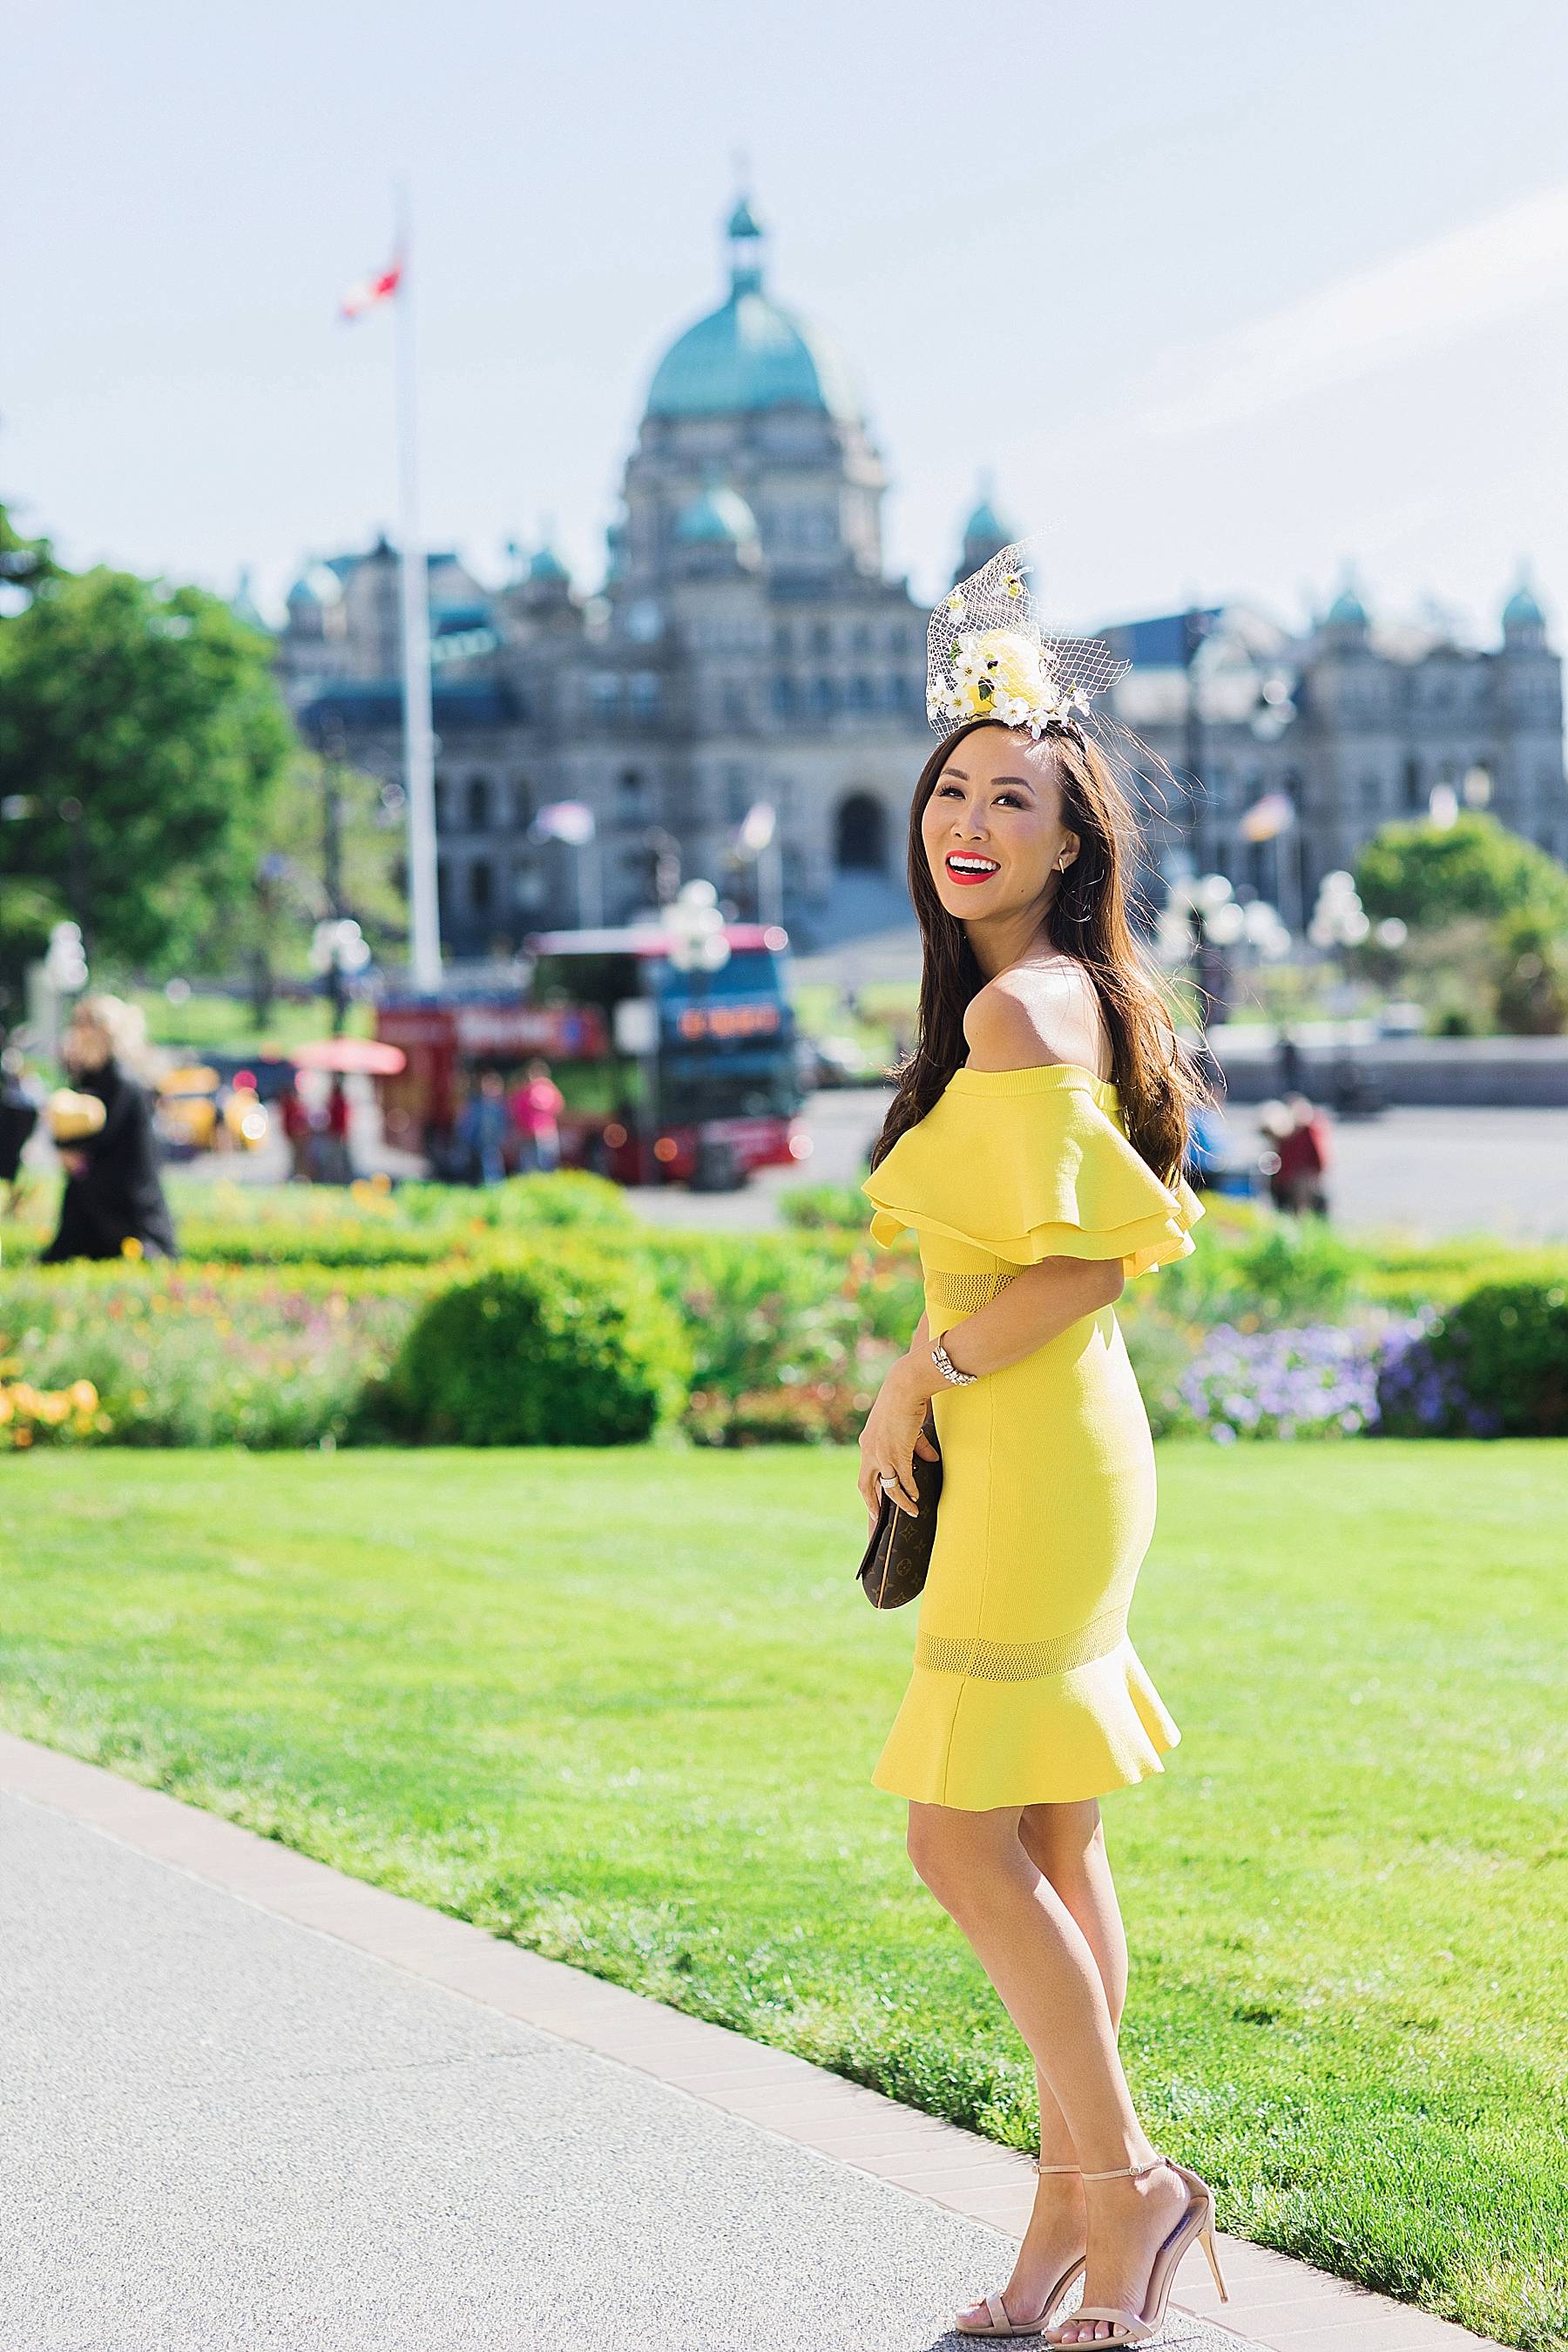 yellow fascinator hat bee hive high tea for bridal shower wedding celebration at empress hotel Victoria Canada wearing yellow off shoulder ruffle dress on blogger Diana Elizabeth standing in front of the Parliament building